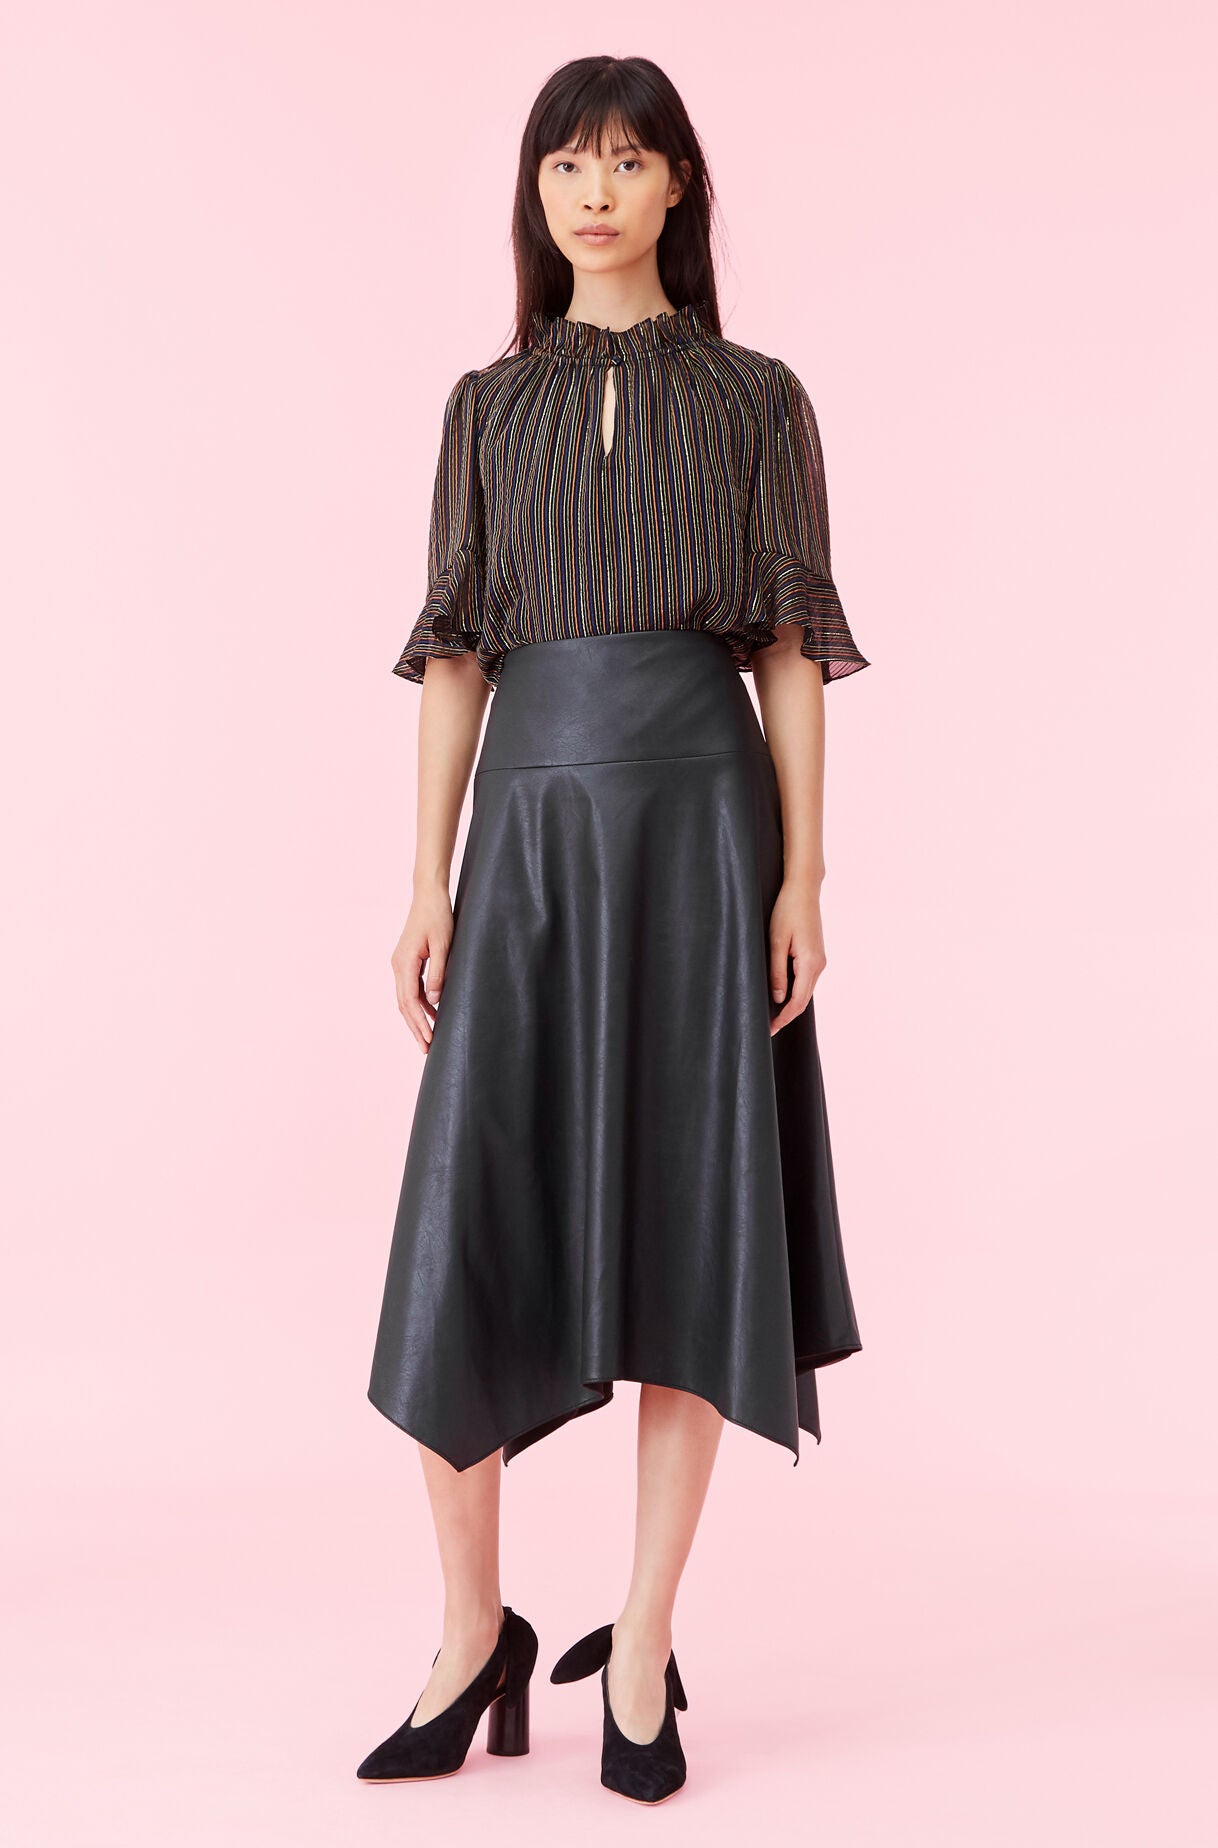 Faux Leather Skirts, Vegan Leather Skirts